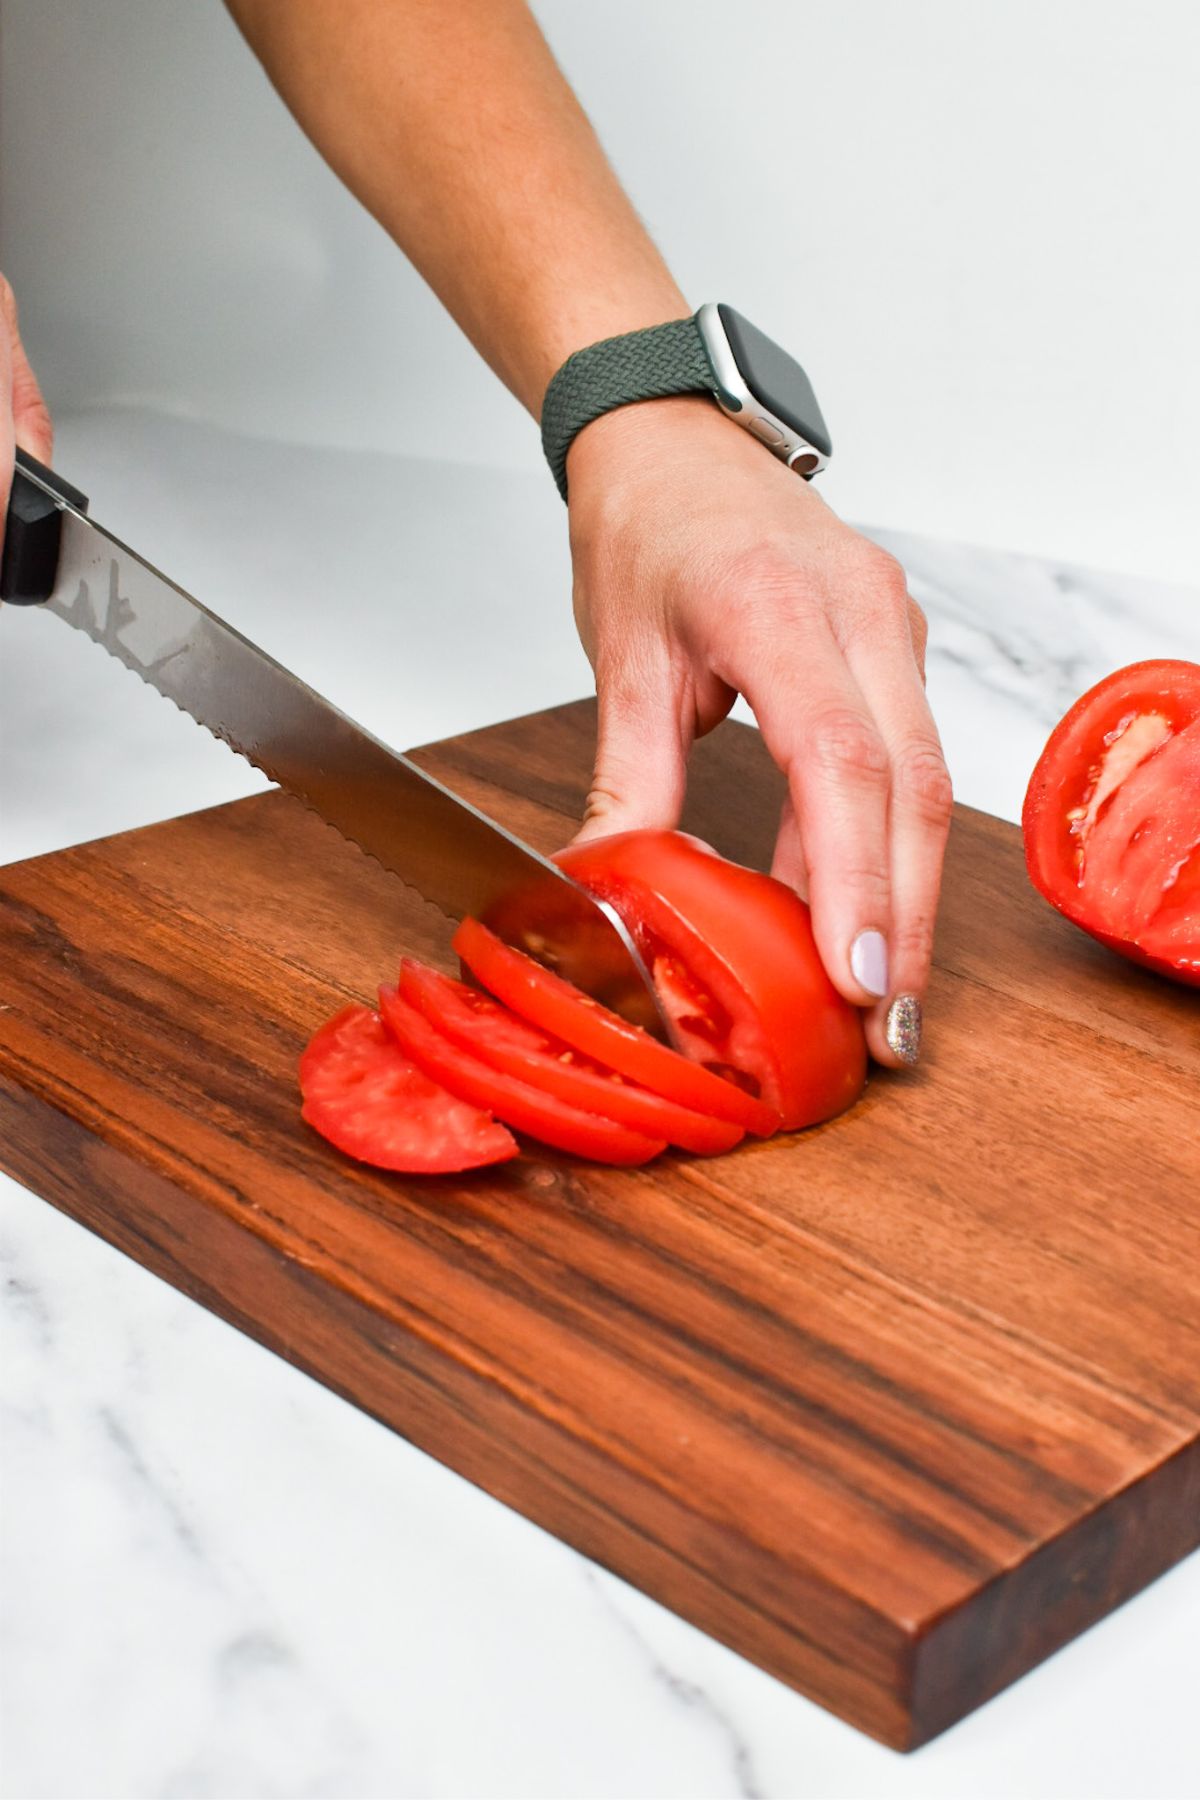 A bread knife being used to cut tomatoes on a wooden cutting board.